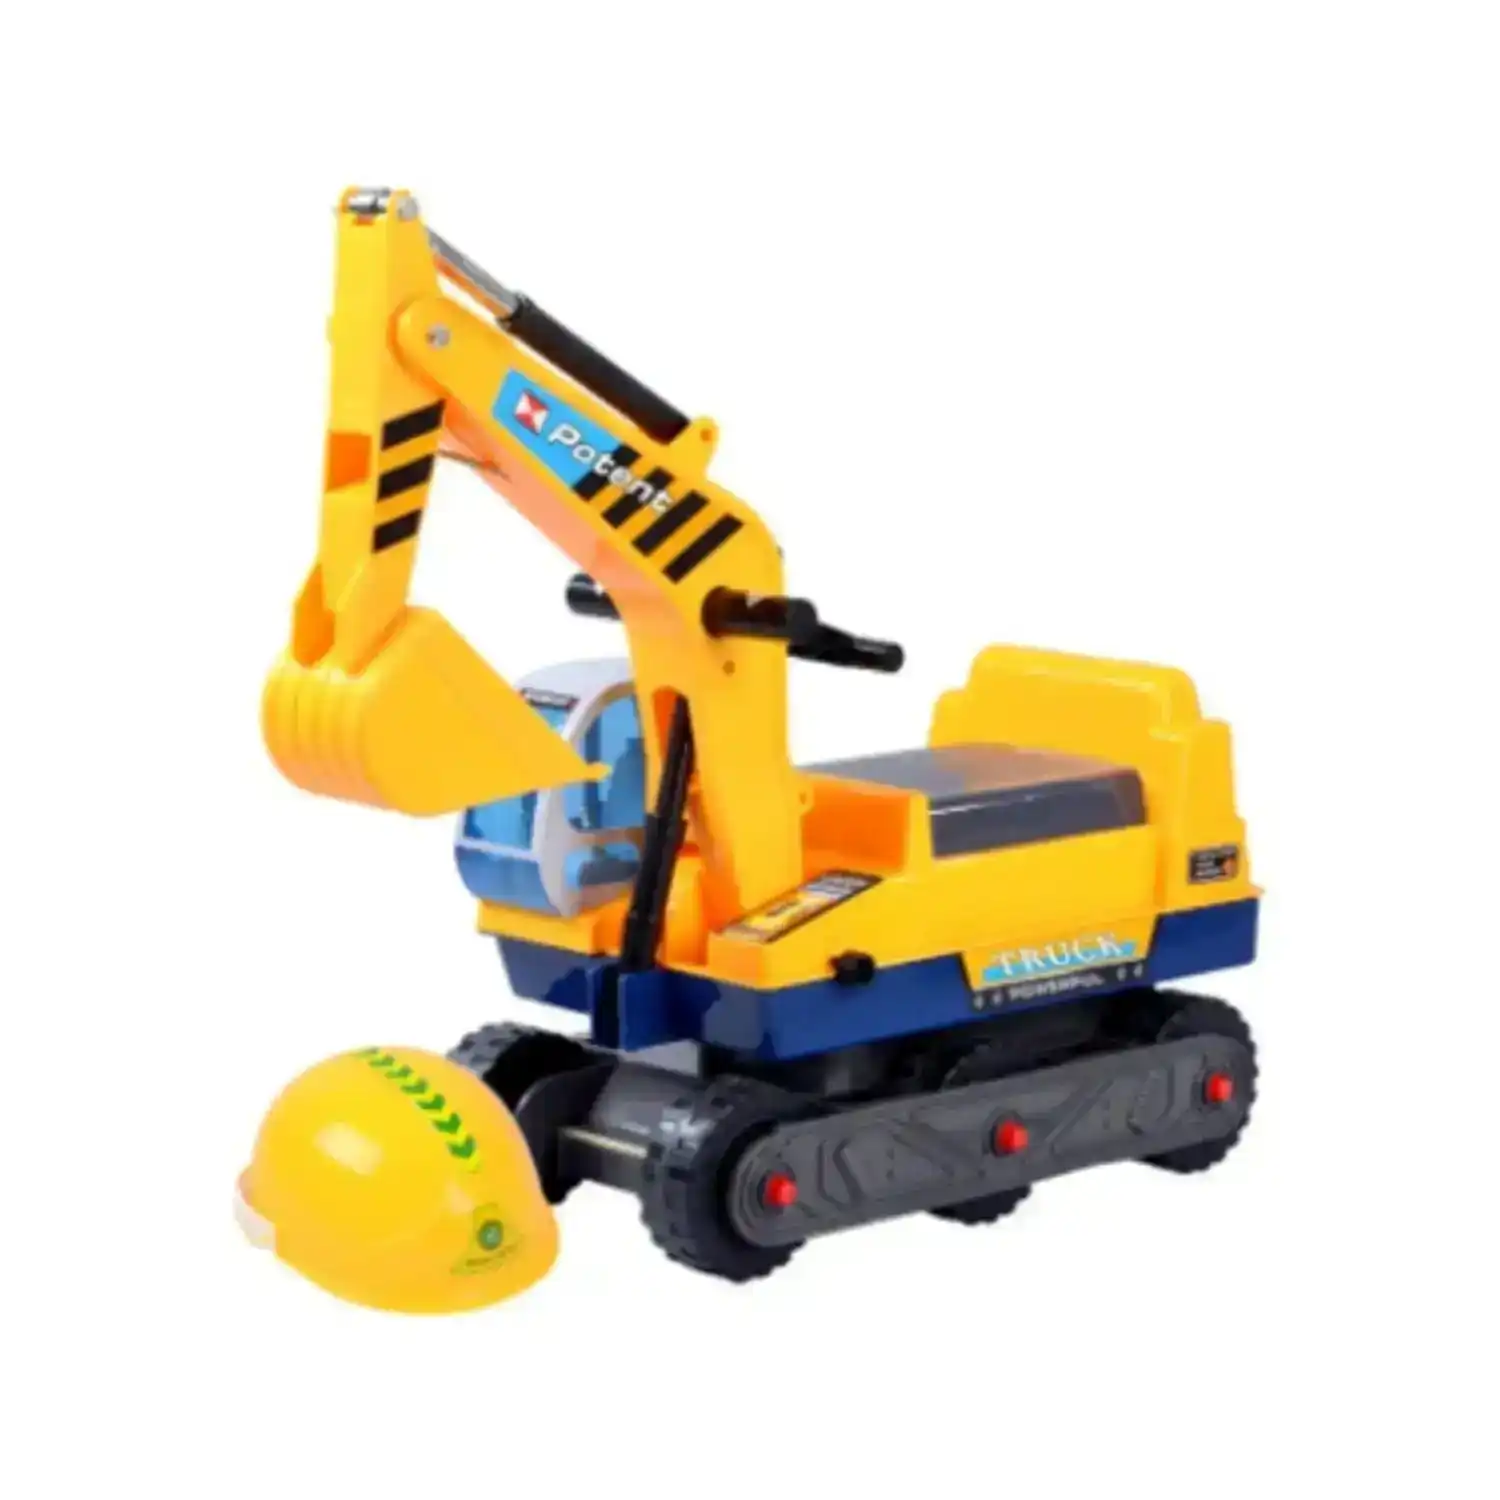 Gominimo Kids Pretend Ride on Sand Excavator Construction Toy Car with Helmet